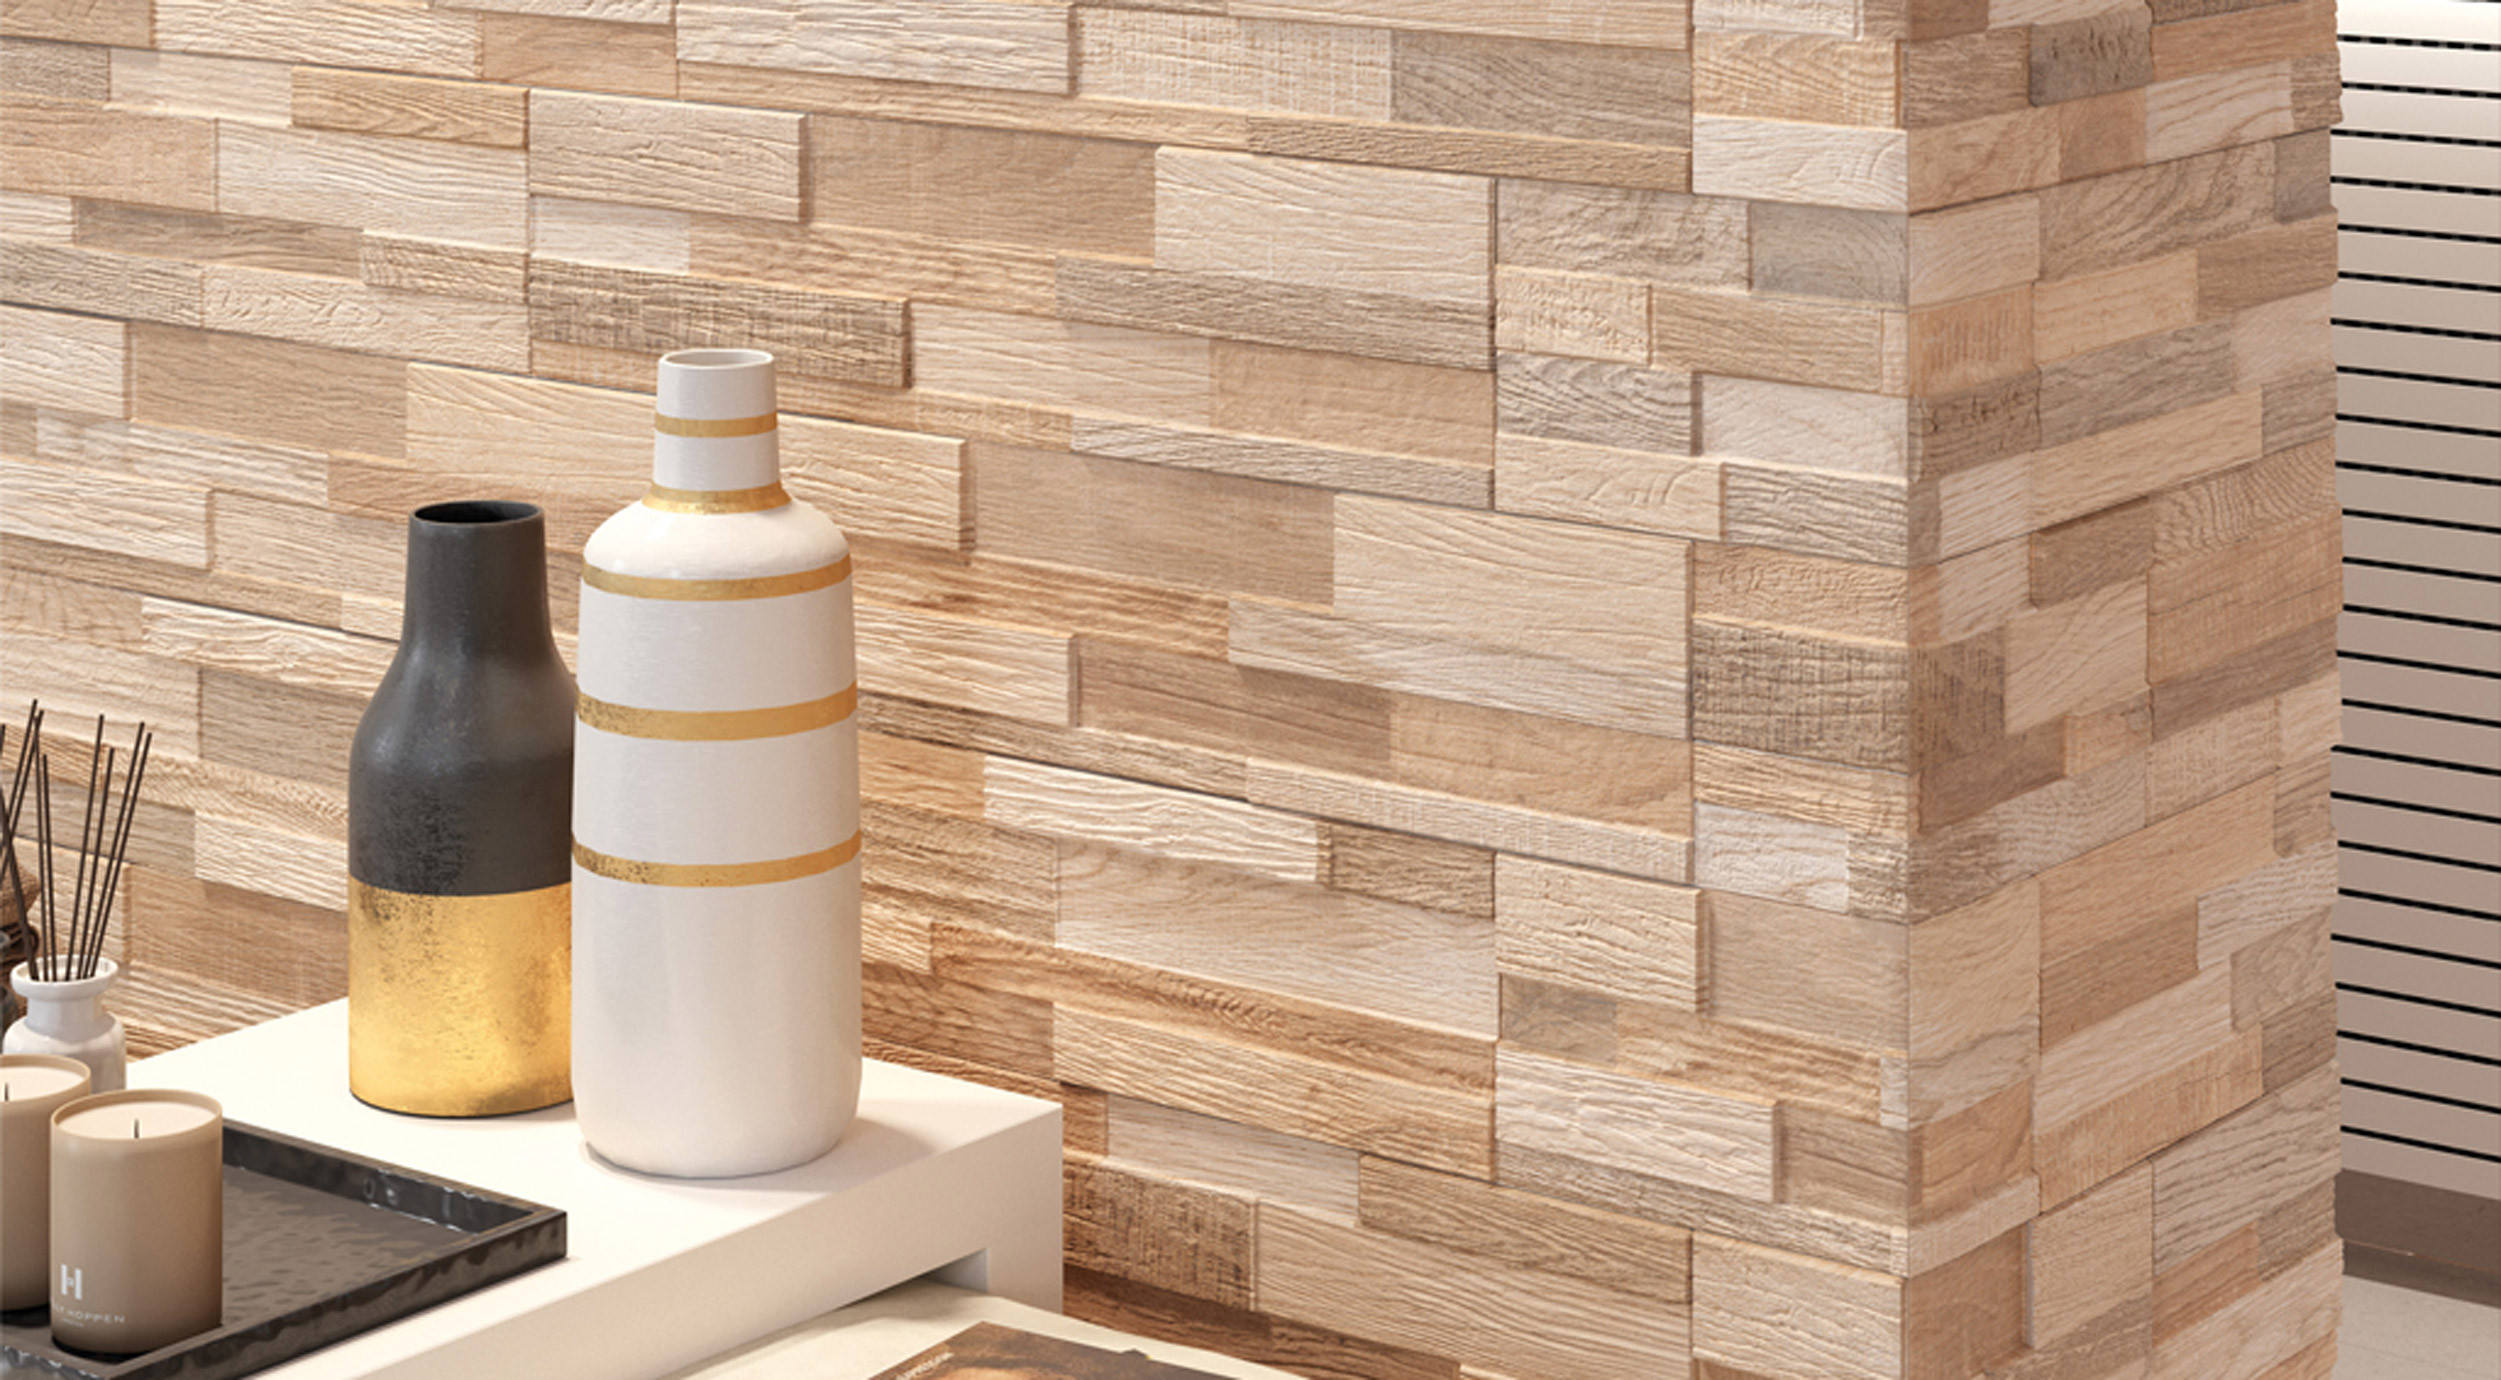 3D Sand Wood Effect Cladding Wall Art series by Ceramica Rondine
